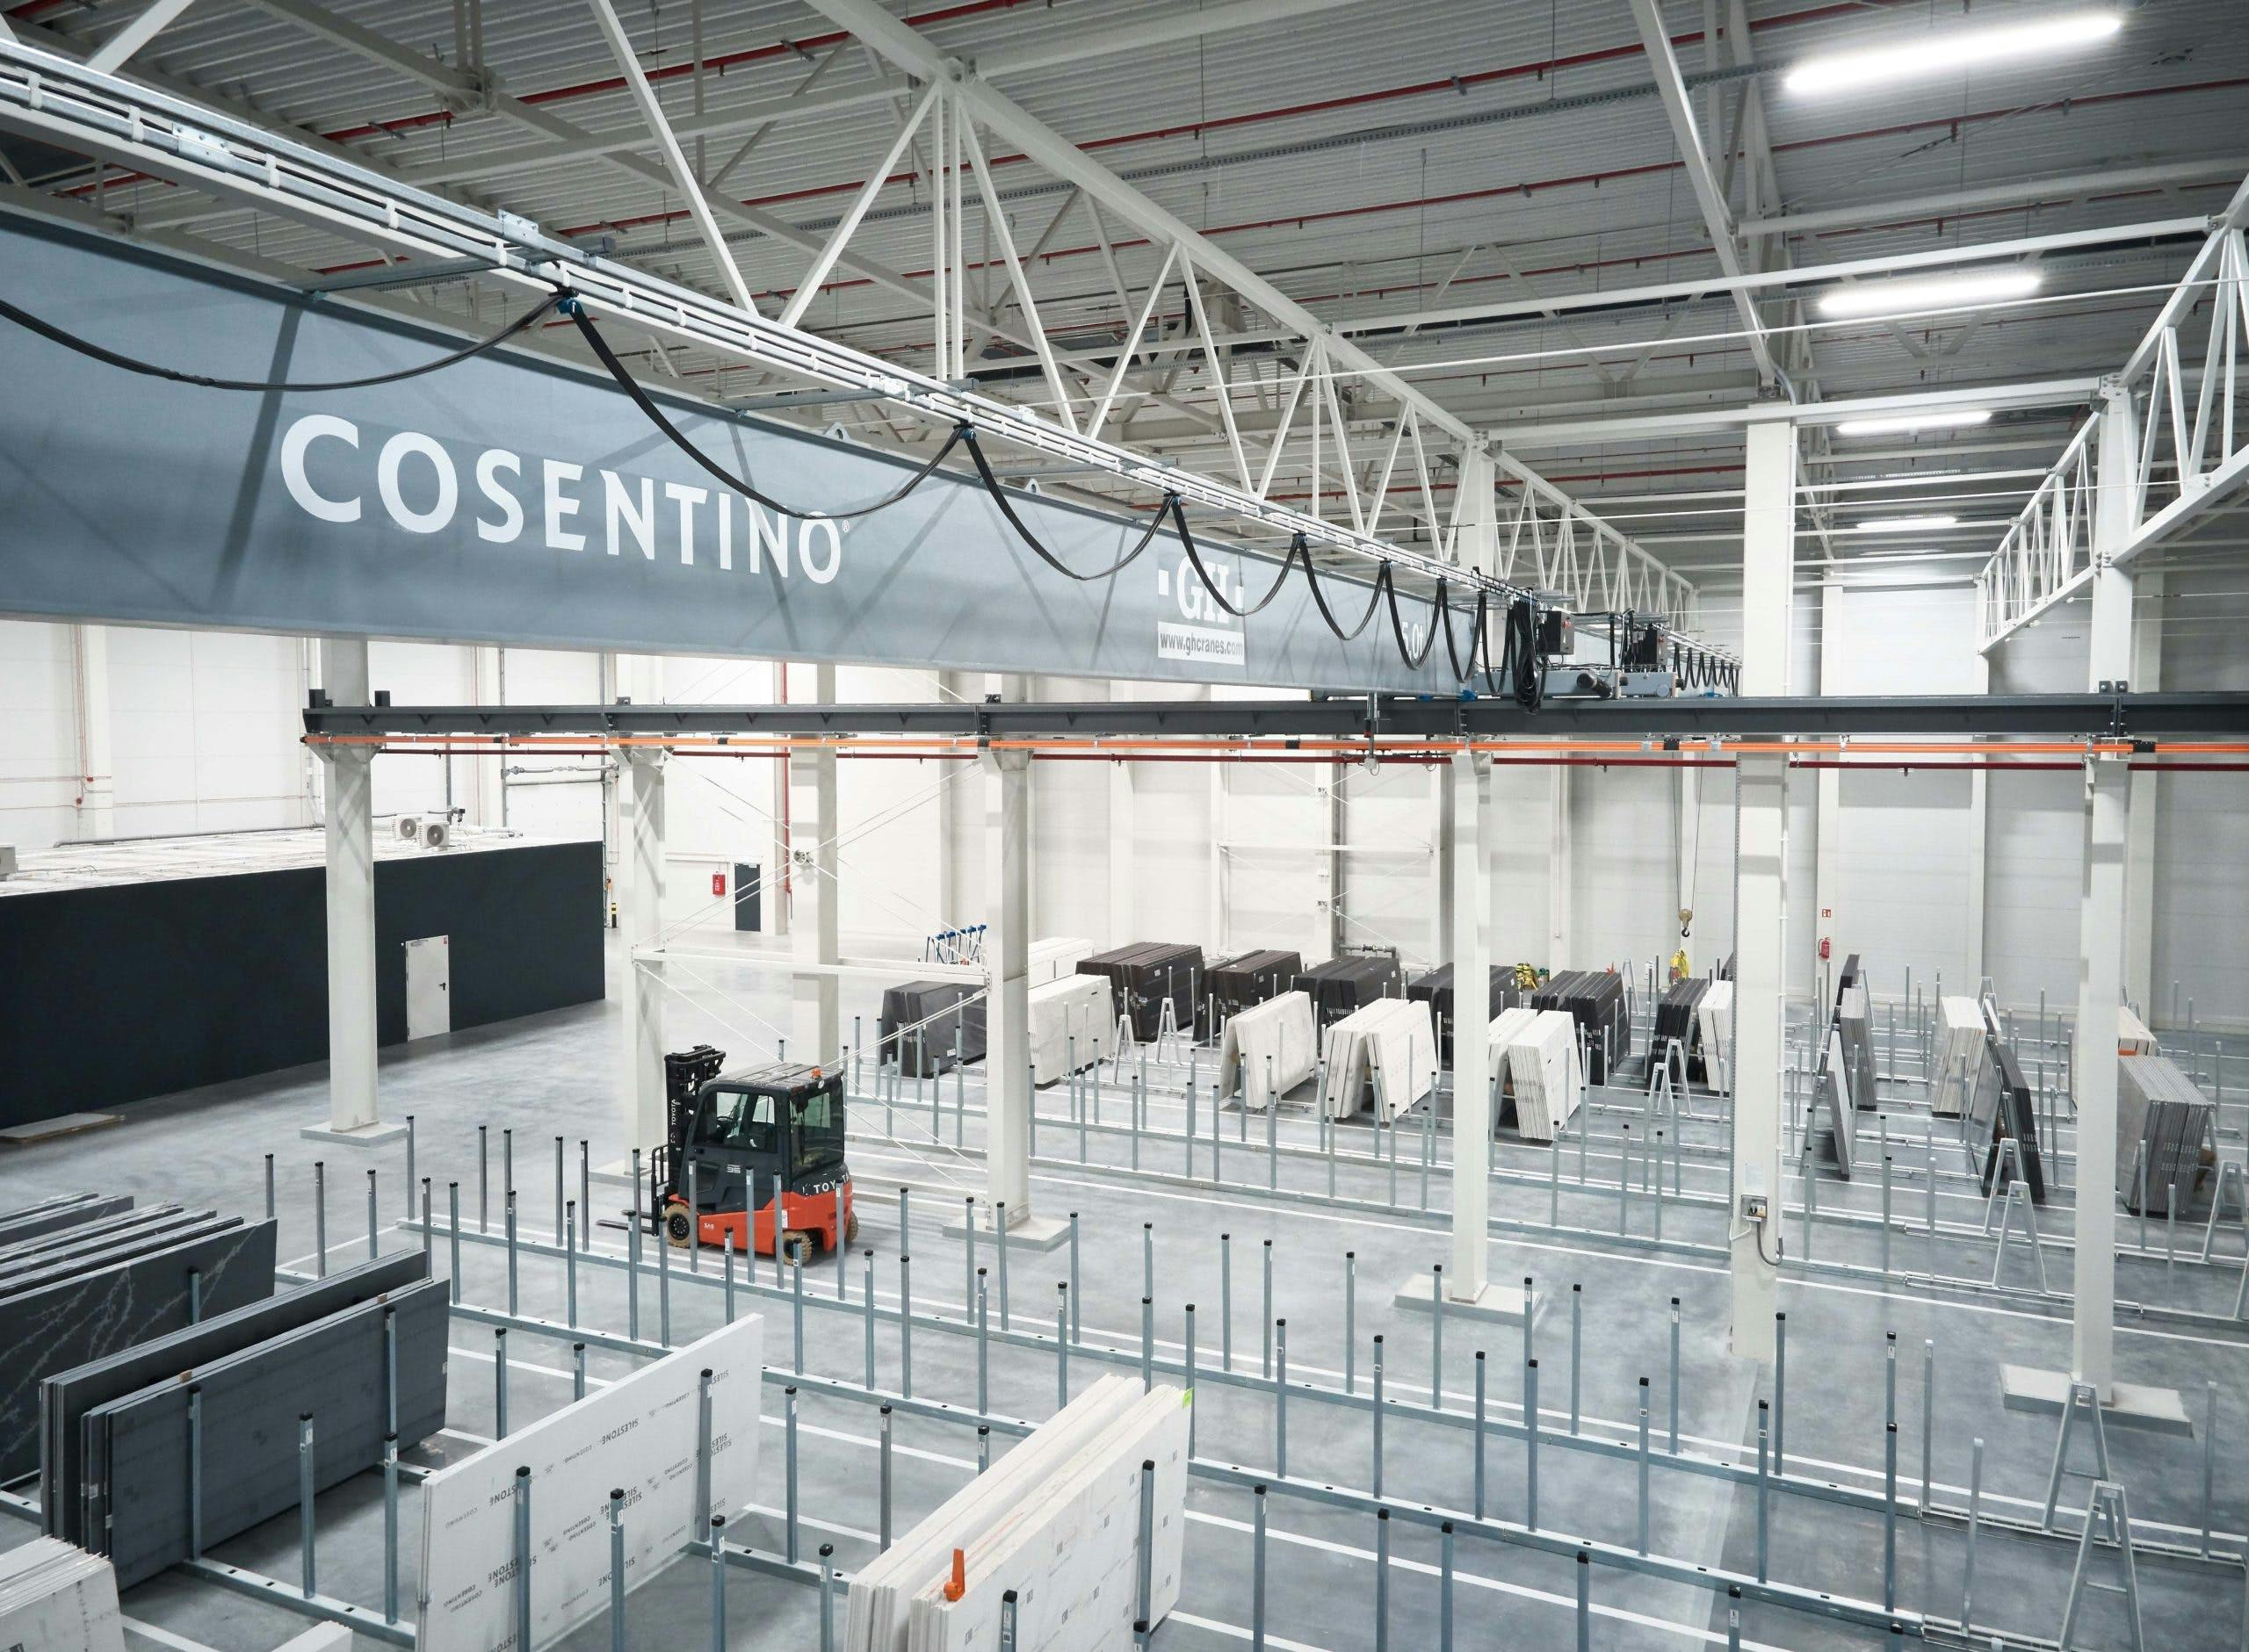 Image 34 of DJI 0002 min scaled 5 in Cosentino opens new distribution "Center" in Katowice - Cosentino